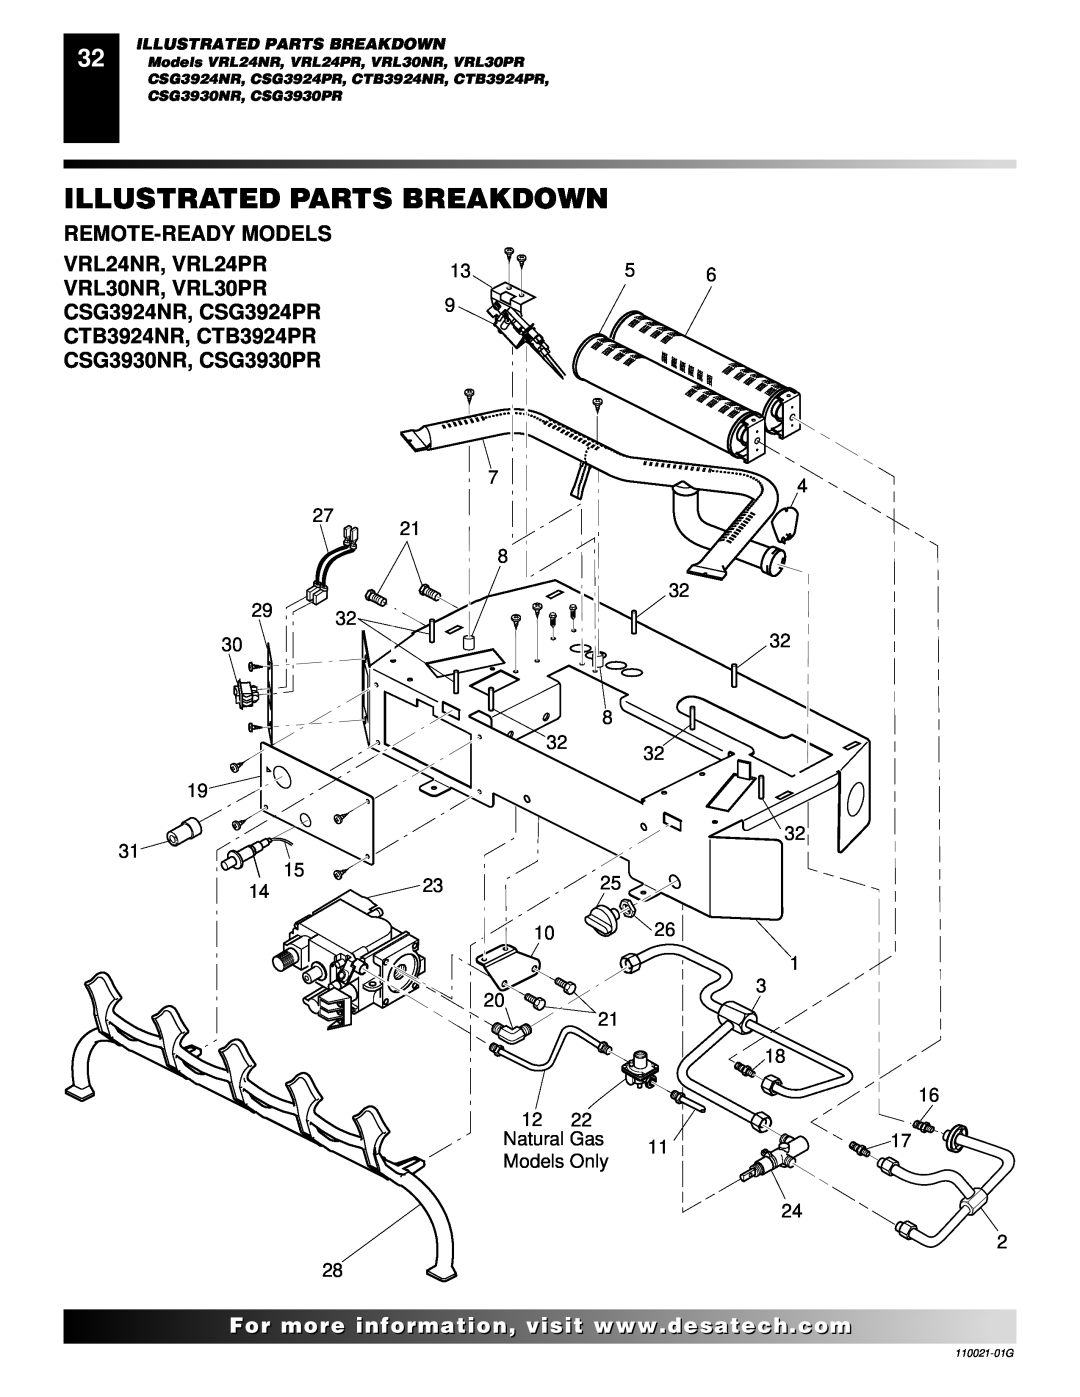 Desa CSG3930PR Remote-Readymodels, Illustrated Parts Breakdown, 21 8 32 32 8 32 32 32, Natural Gas, Models Only, To P 